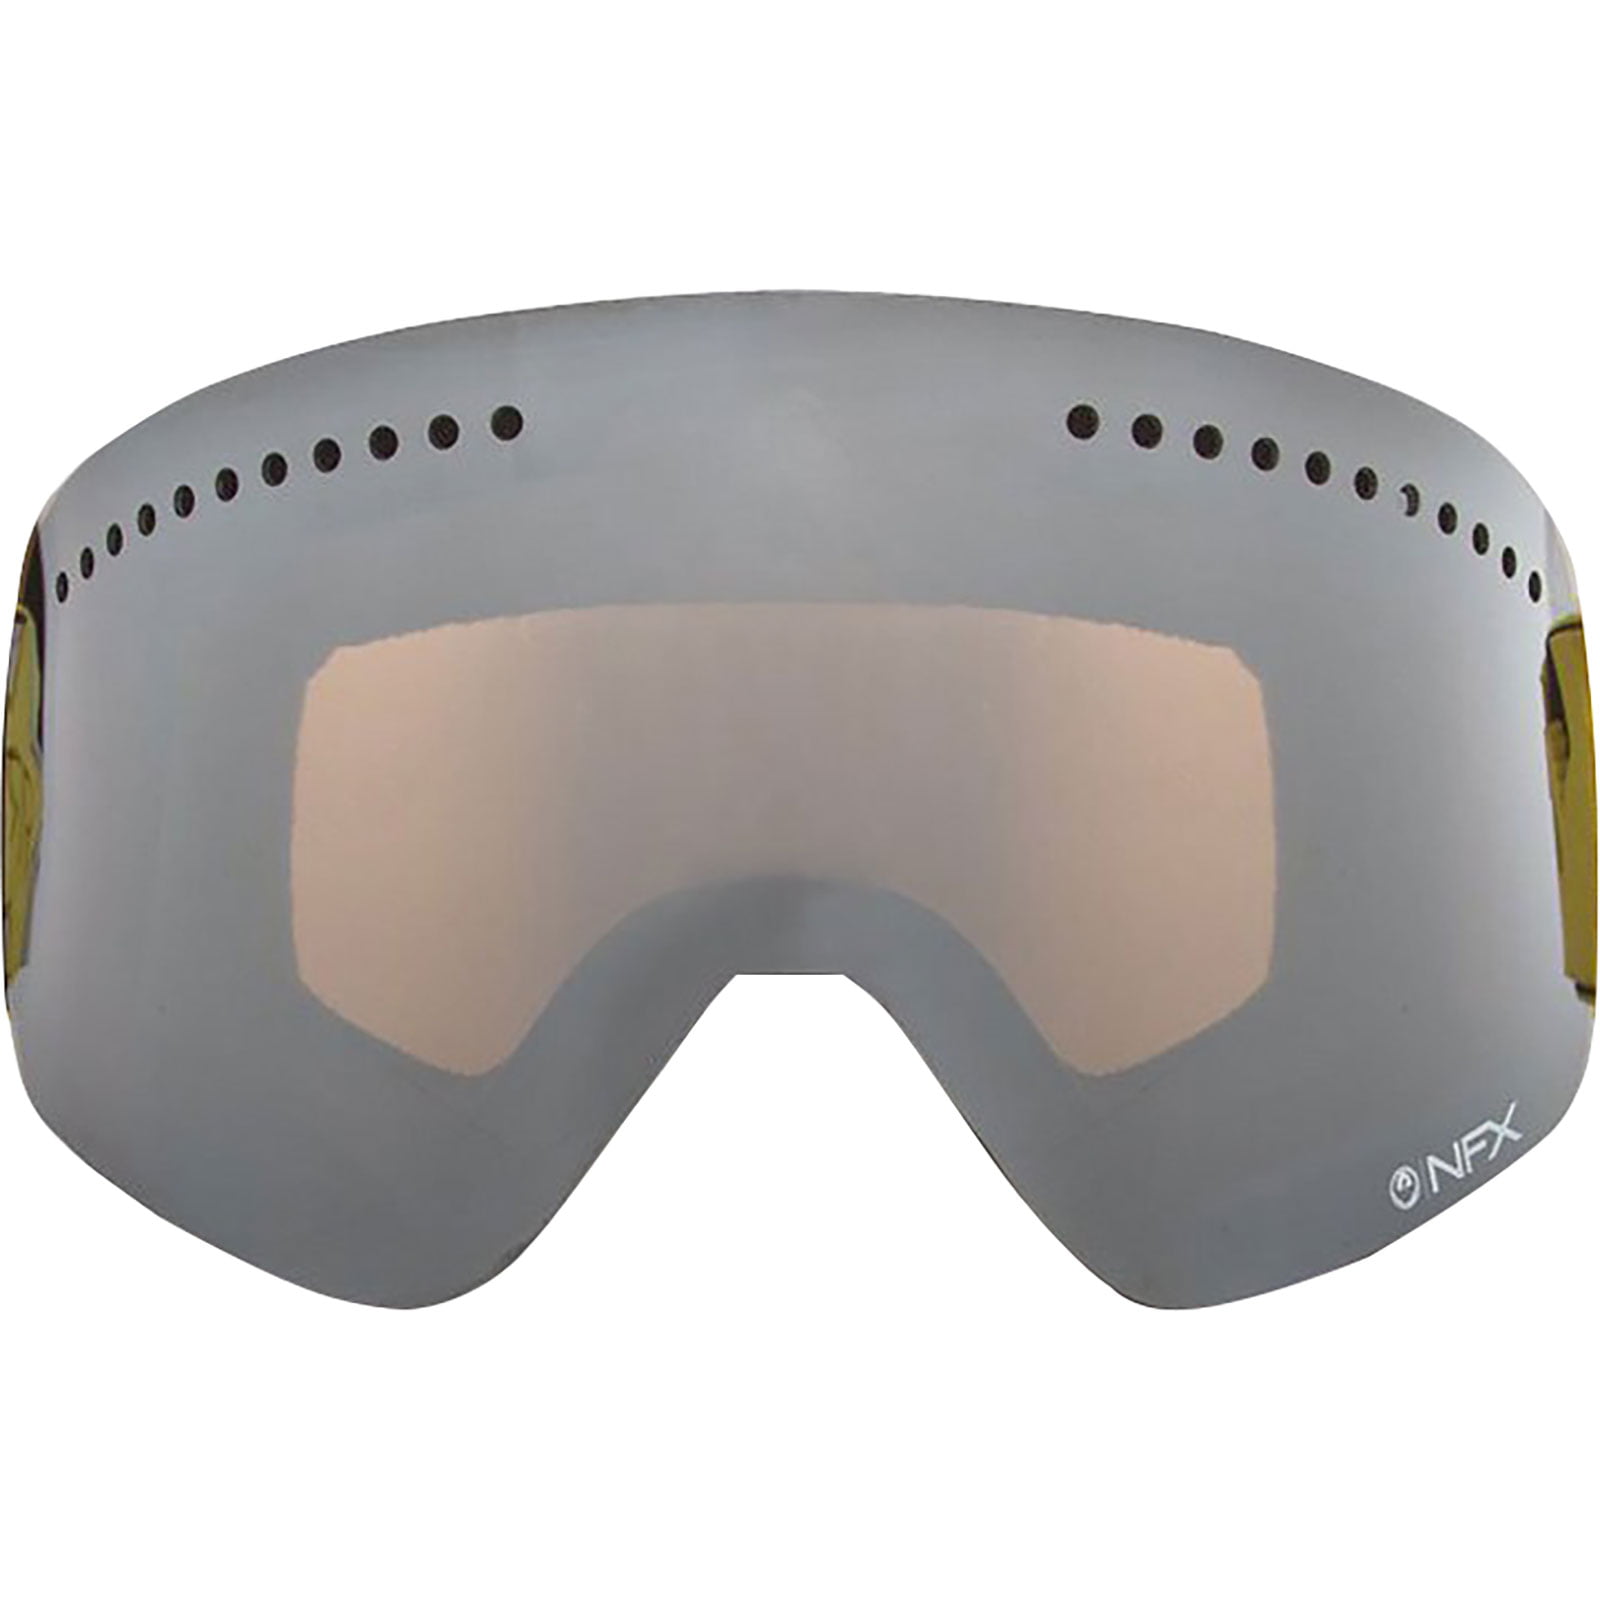 Dragon NFX Snow Goggle Replacement Lens 